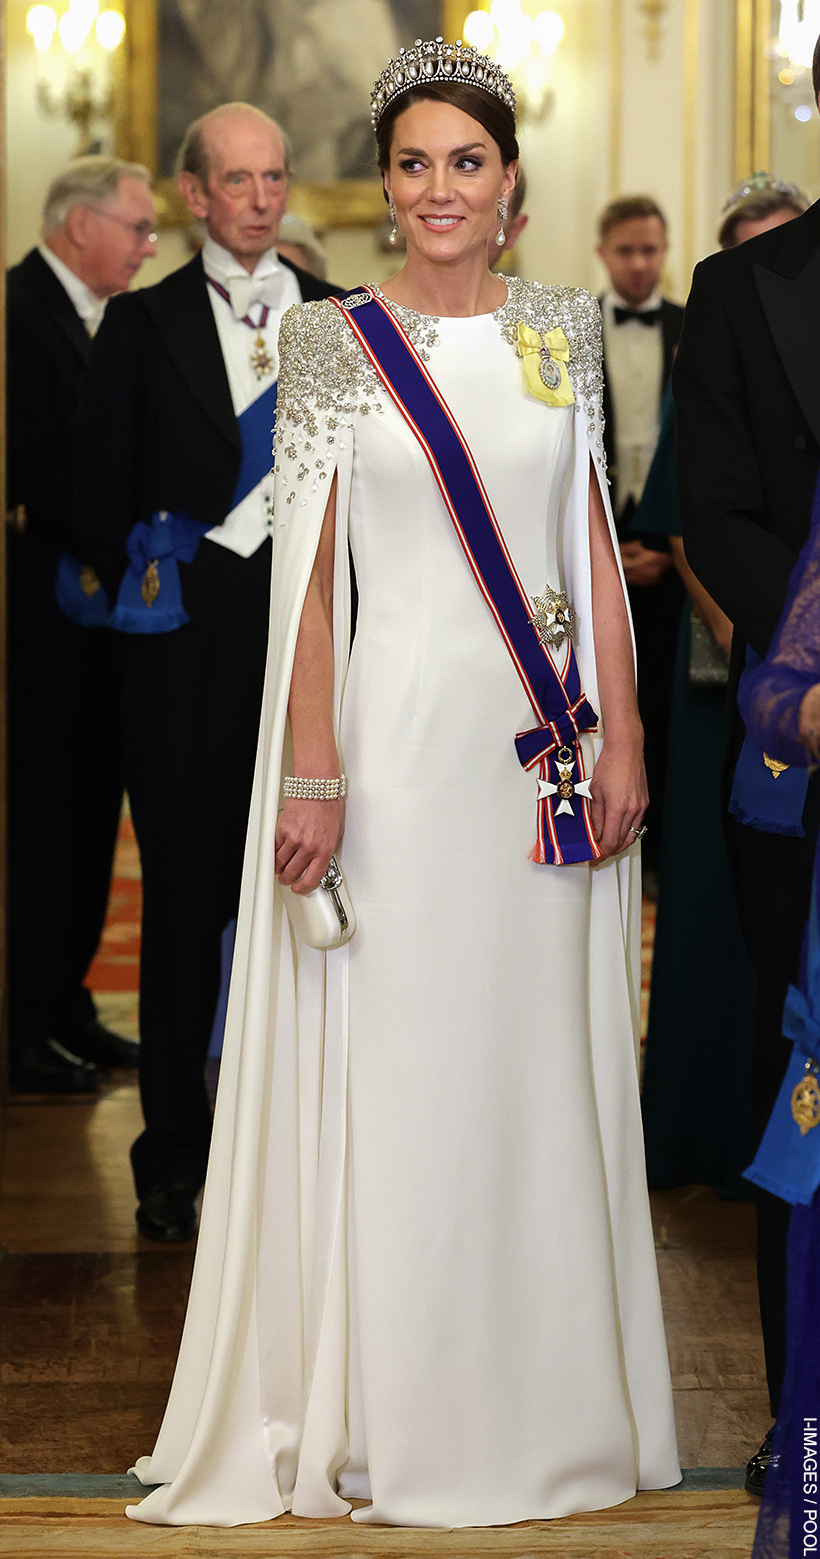 Kate Middleton smiling, wearing a tiara, pearl earrings and white dress with crystal detail at the South Africa State Banquet in 2022